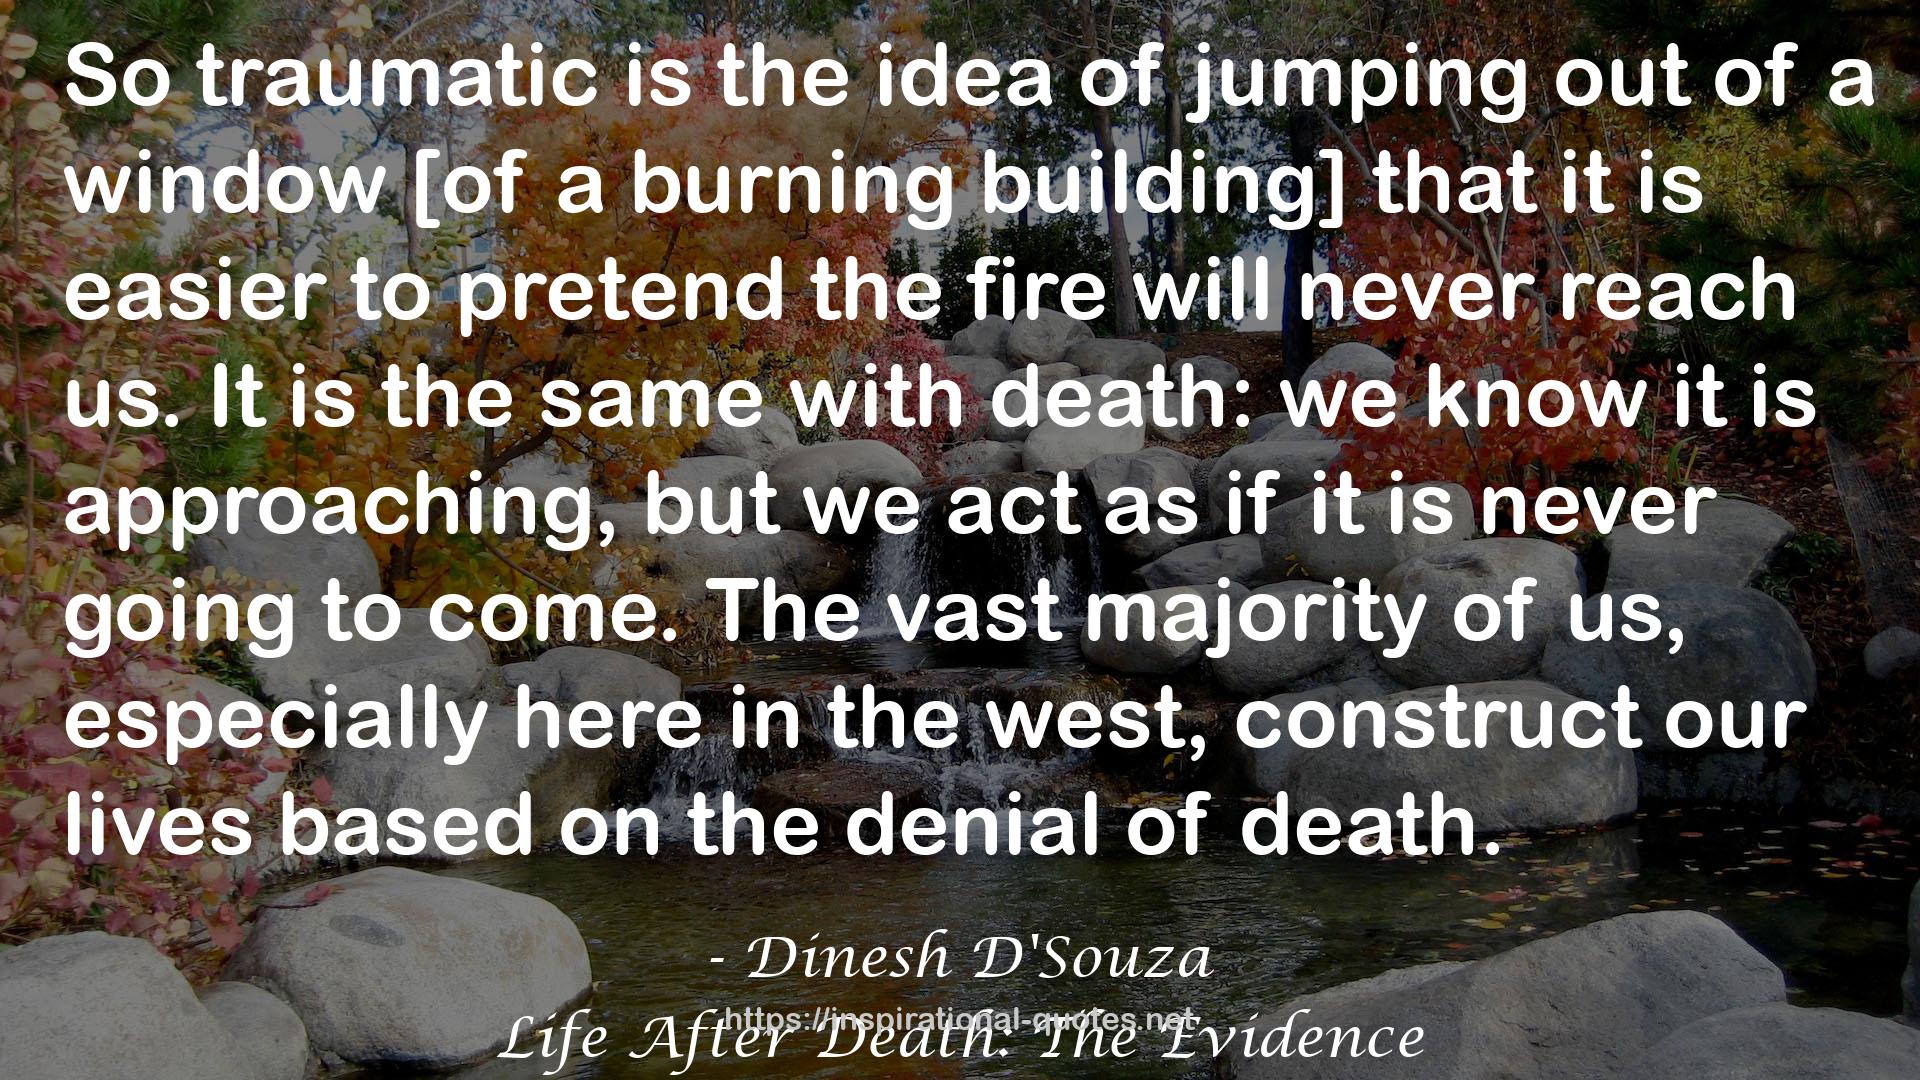 Life After Death: The Evidence QUOTES